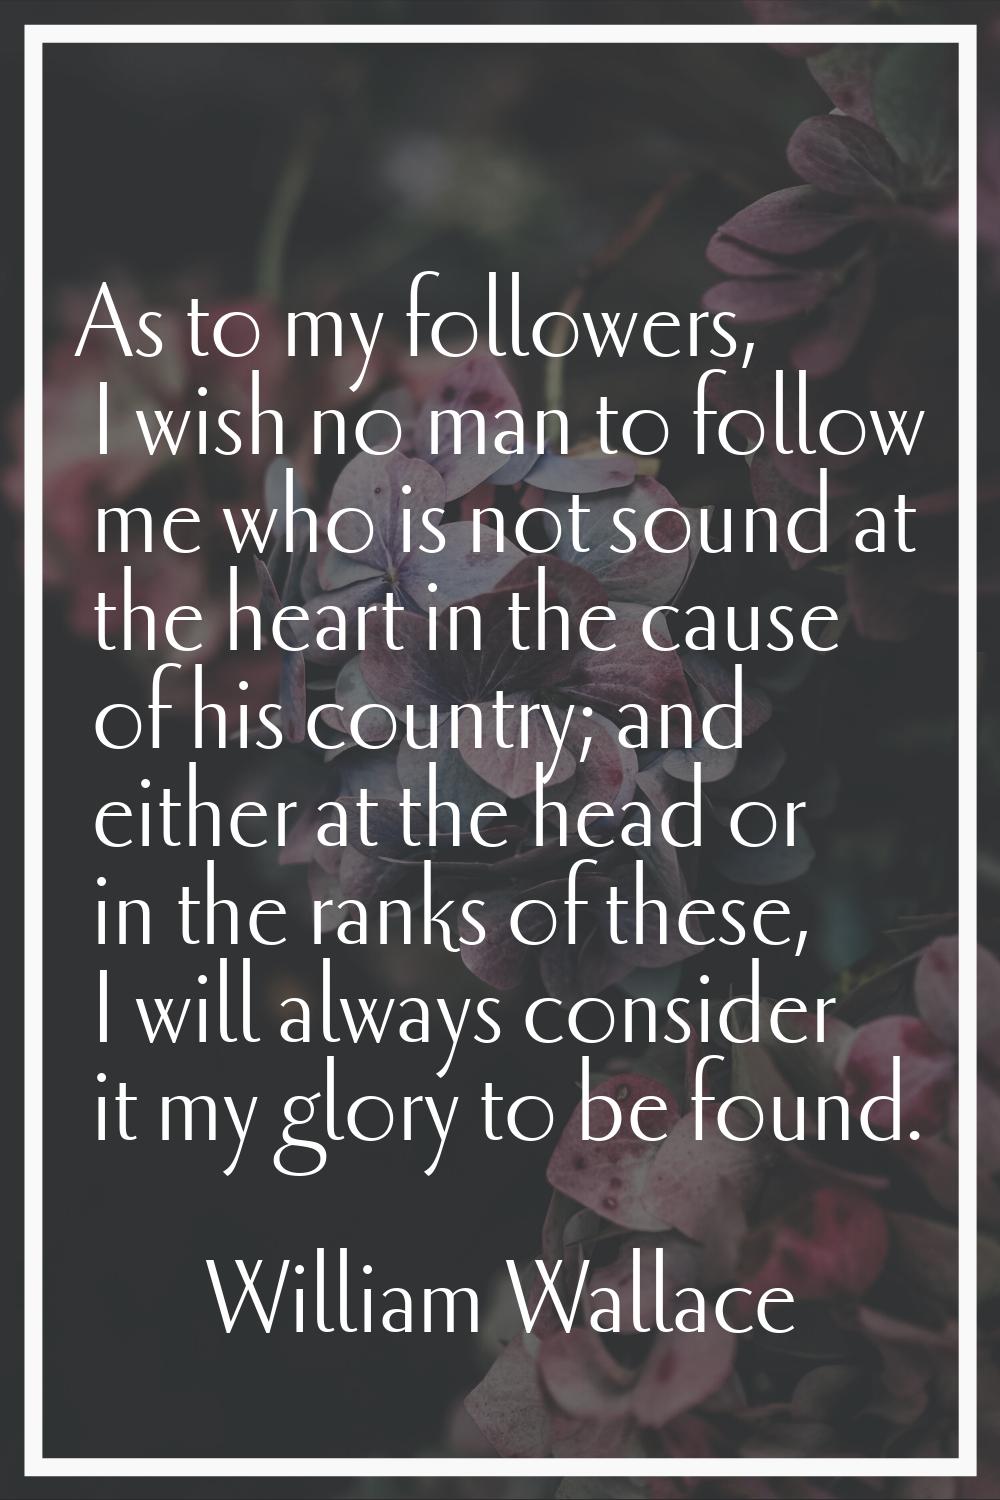 As to my followers, I wish no man to follow me who is not sound at the heart in the cause of his co